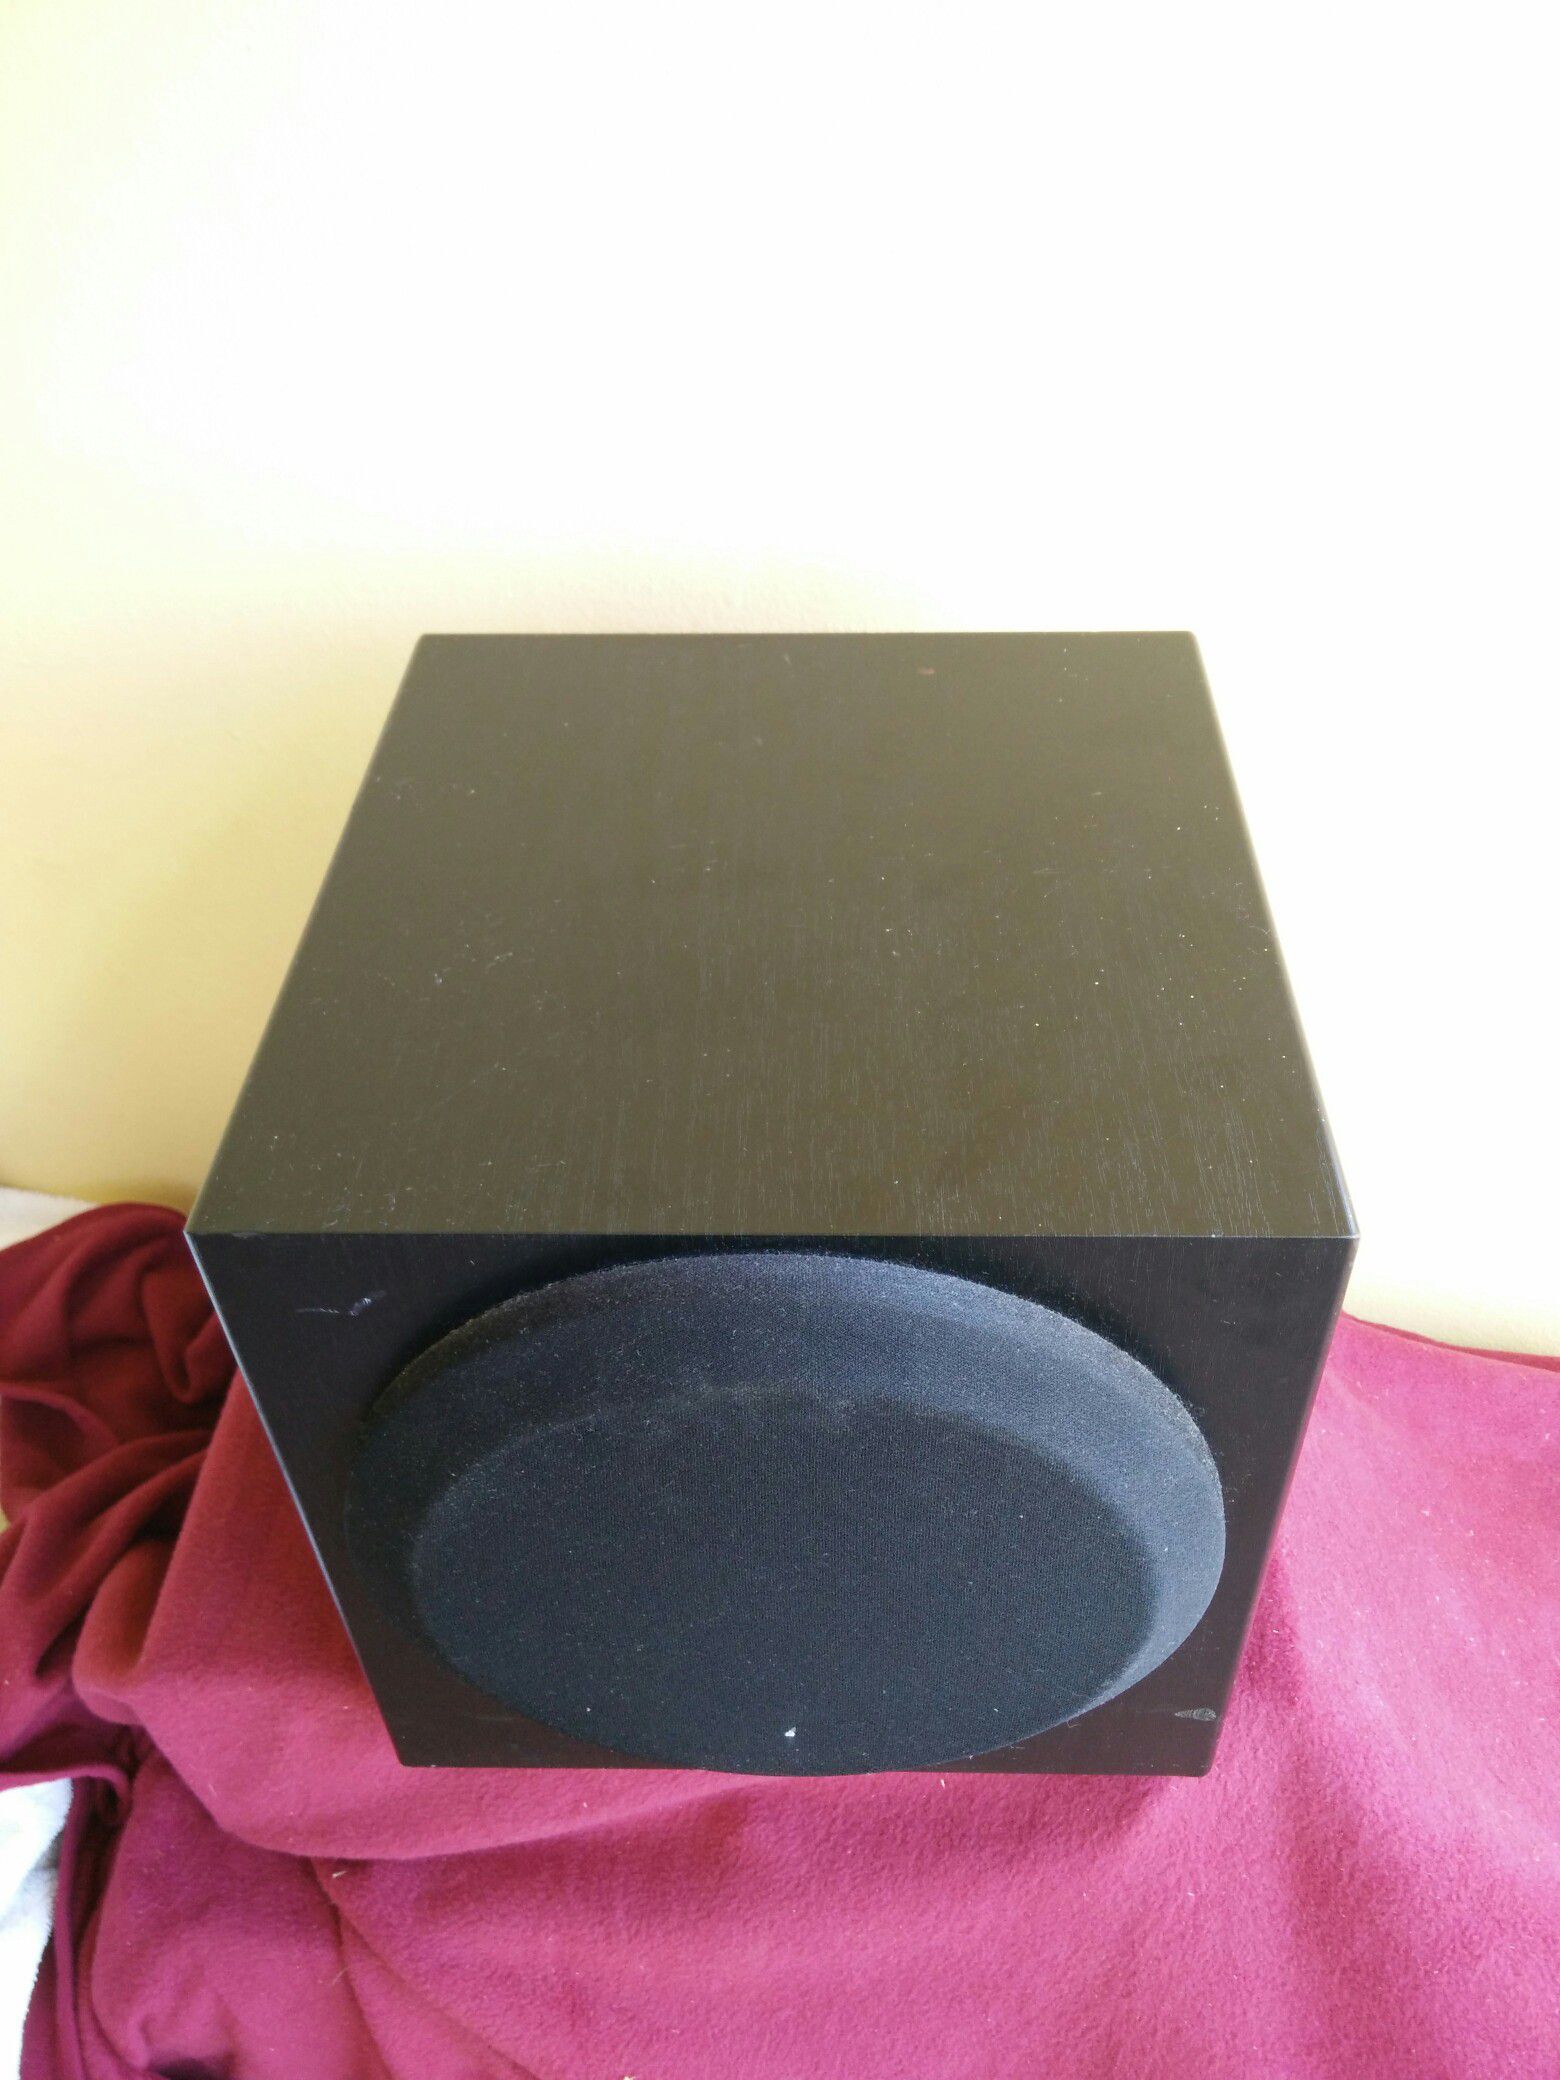 Yamaha subwoofer..near mint!! Sounds awesome..very compact!!